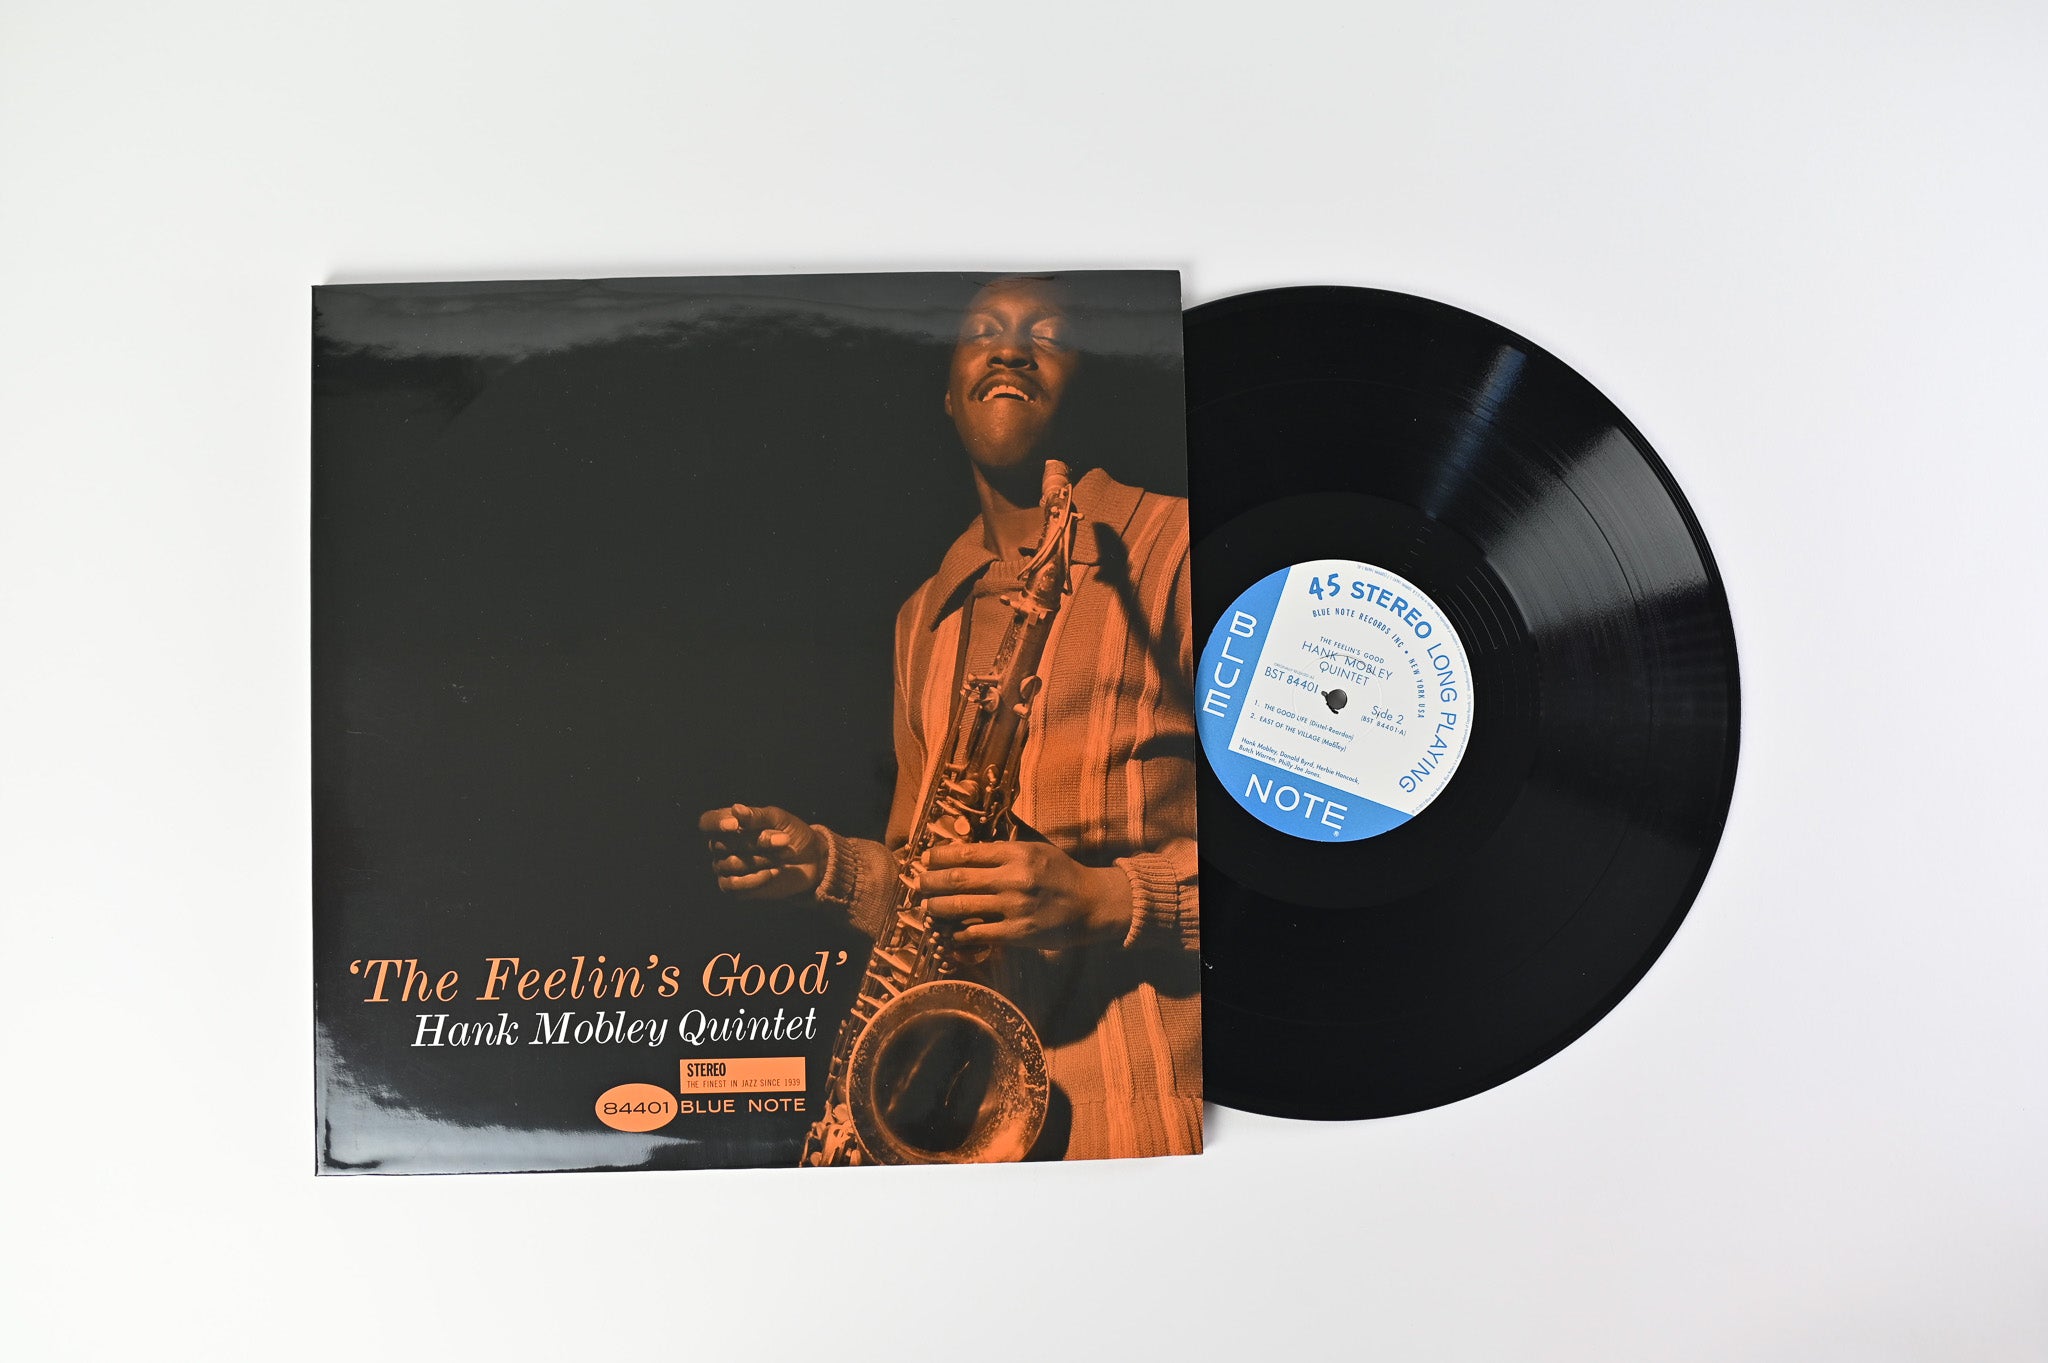 The Hank Mobley Quintet - The Feelin's Good on Blue Note Music Matter Ltd Numbered Reissue 45 RPM